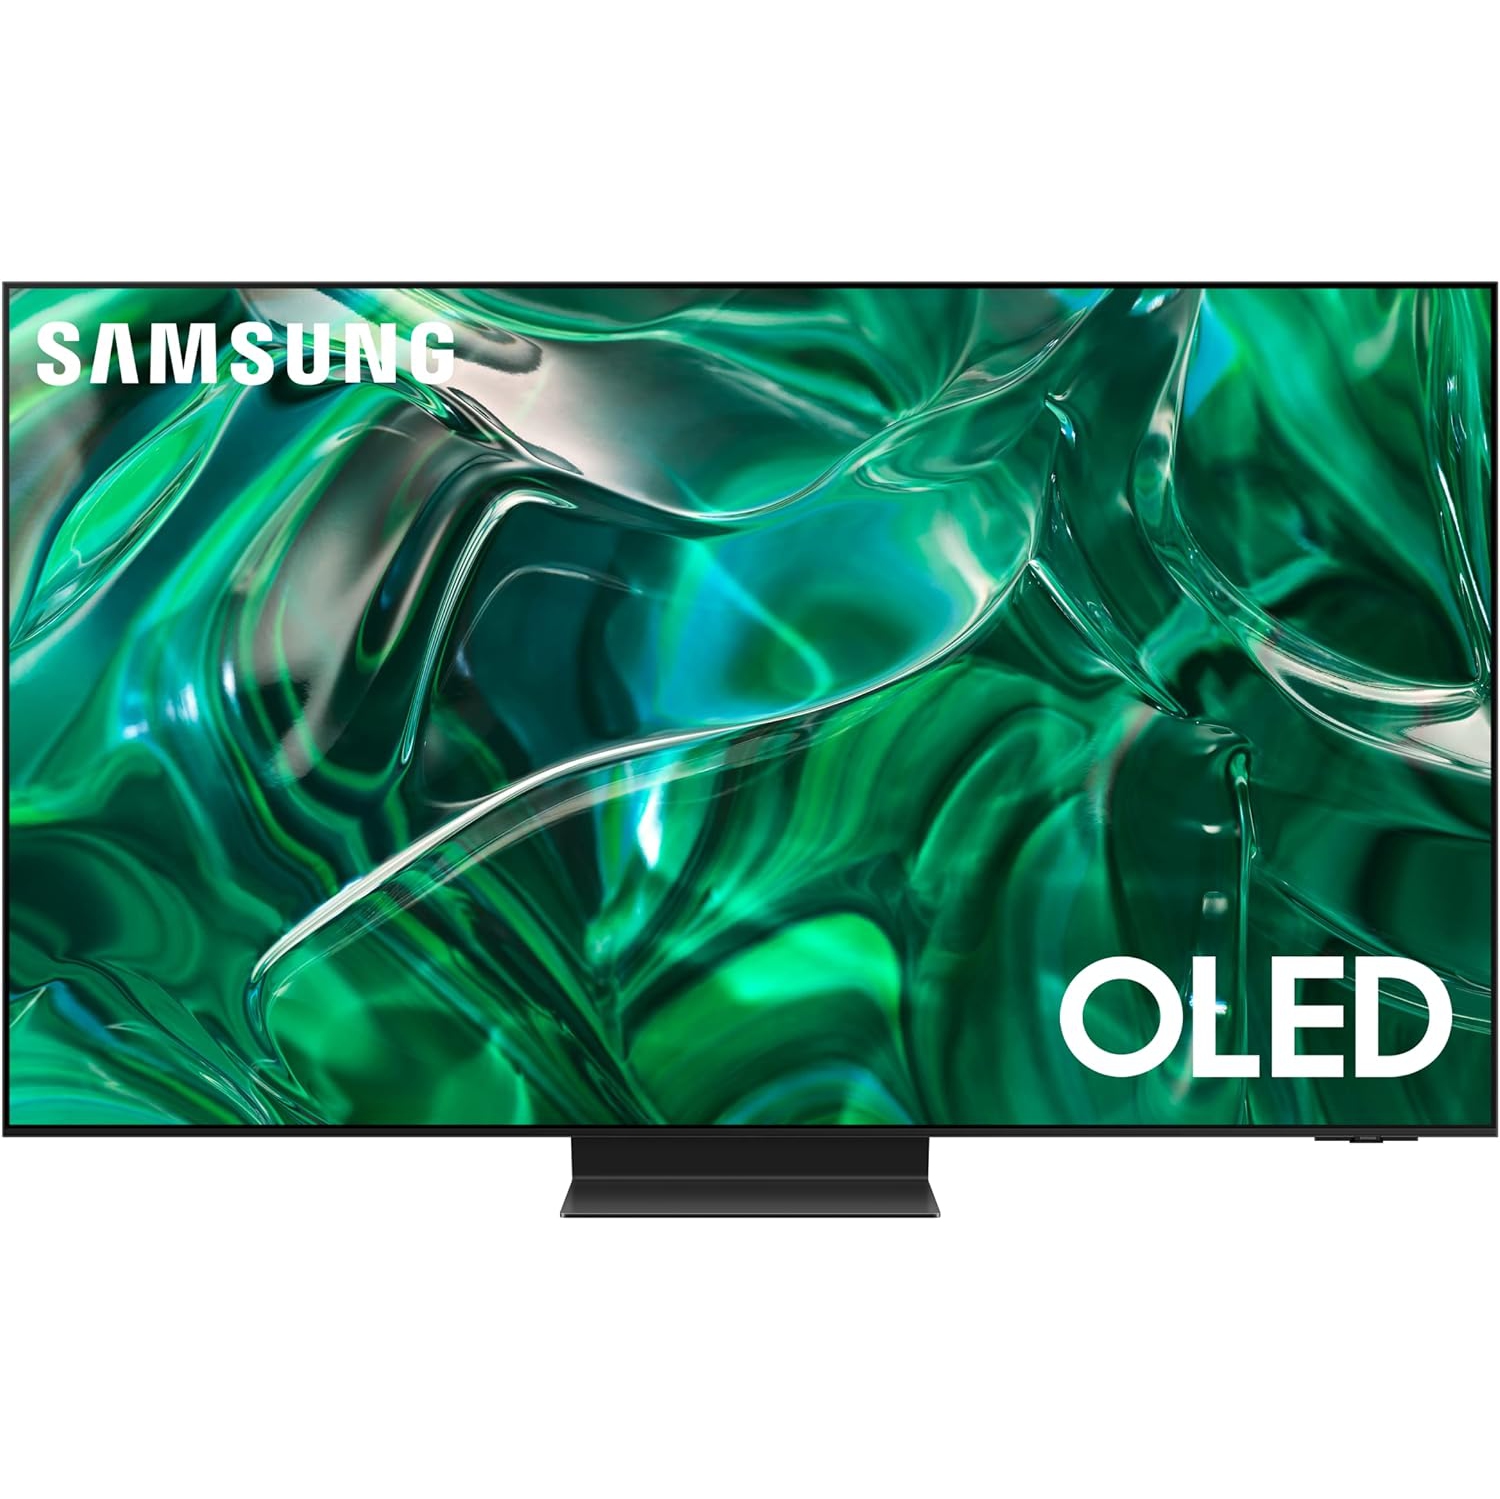 Open Box - Samsung 55" 4K UHD HDR OLED Tizen Smart TV (QN55S95CAFXZC) - 2023 With 1 Year Samsung Warranty